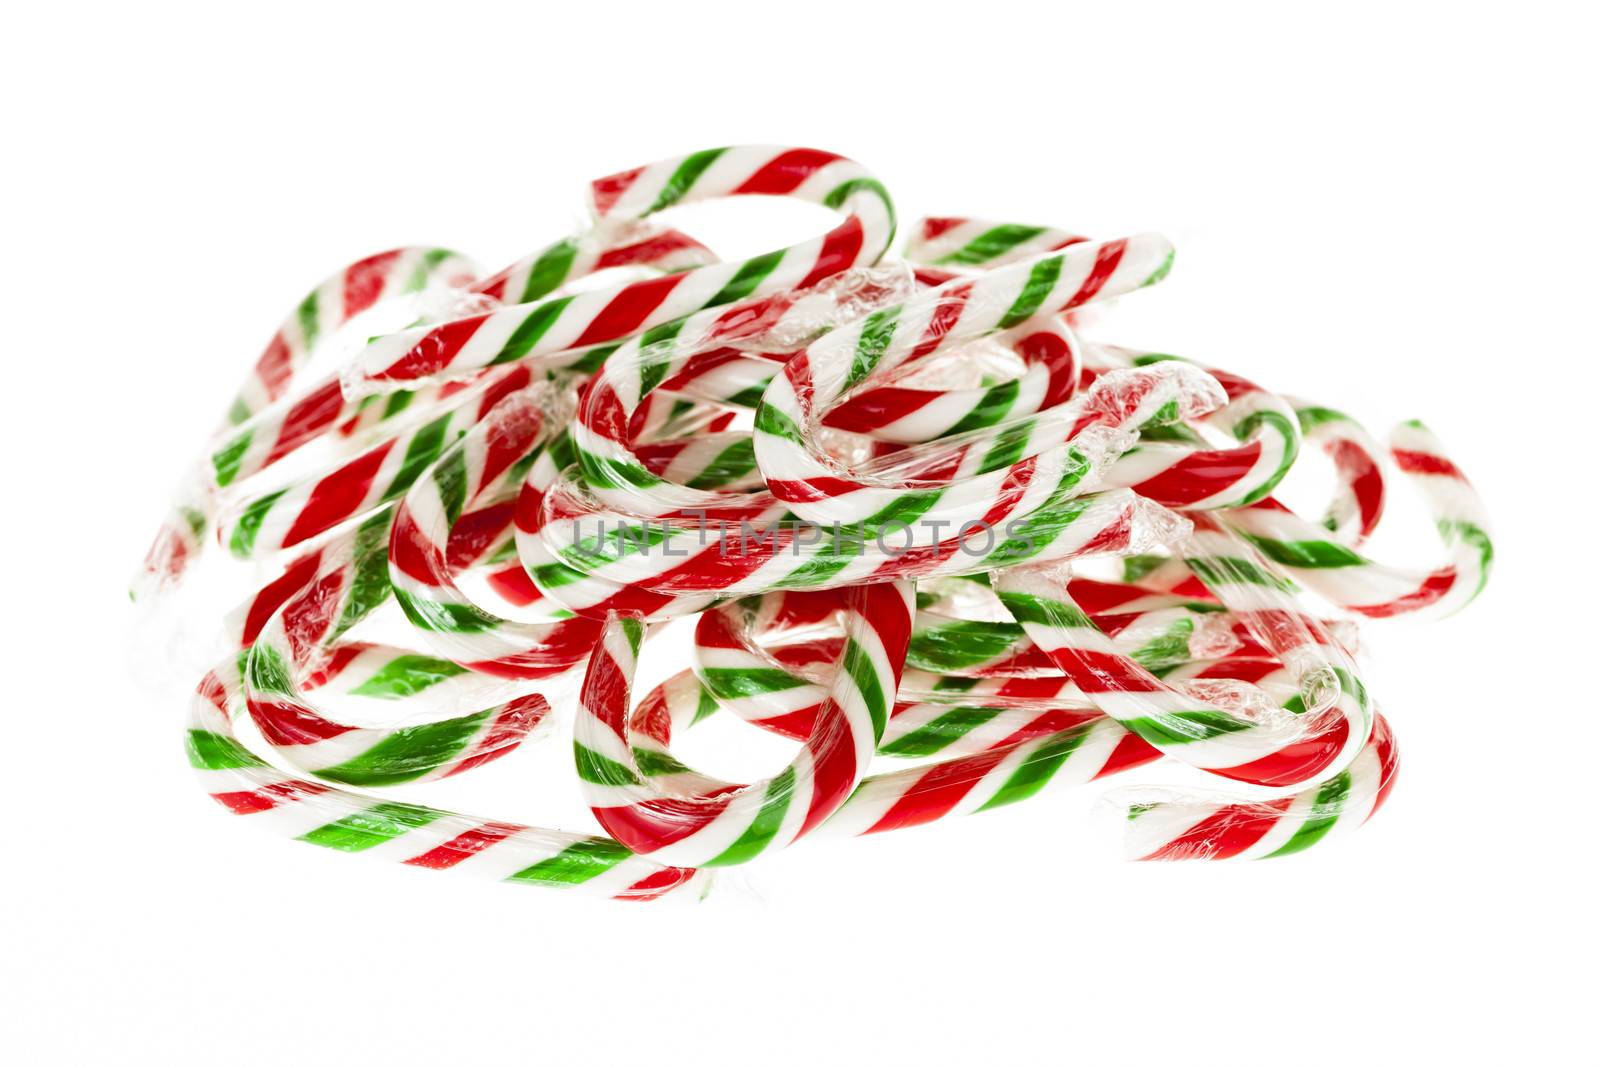 Pile of red and green Christmas candy canes isolated on white background